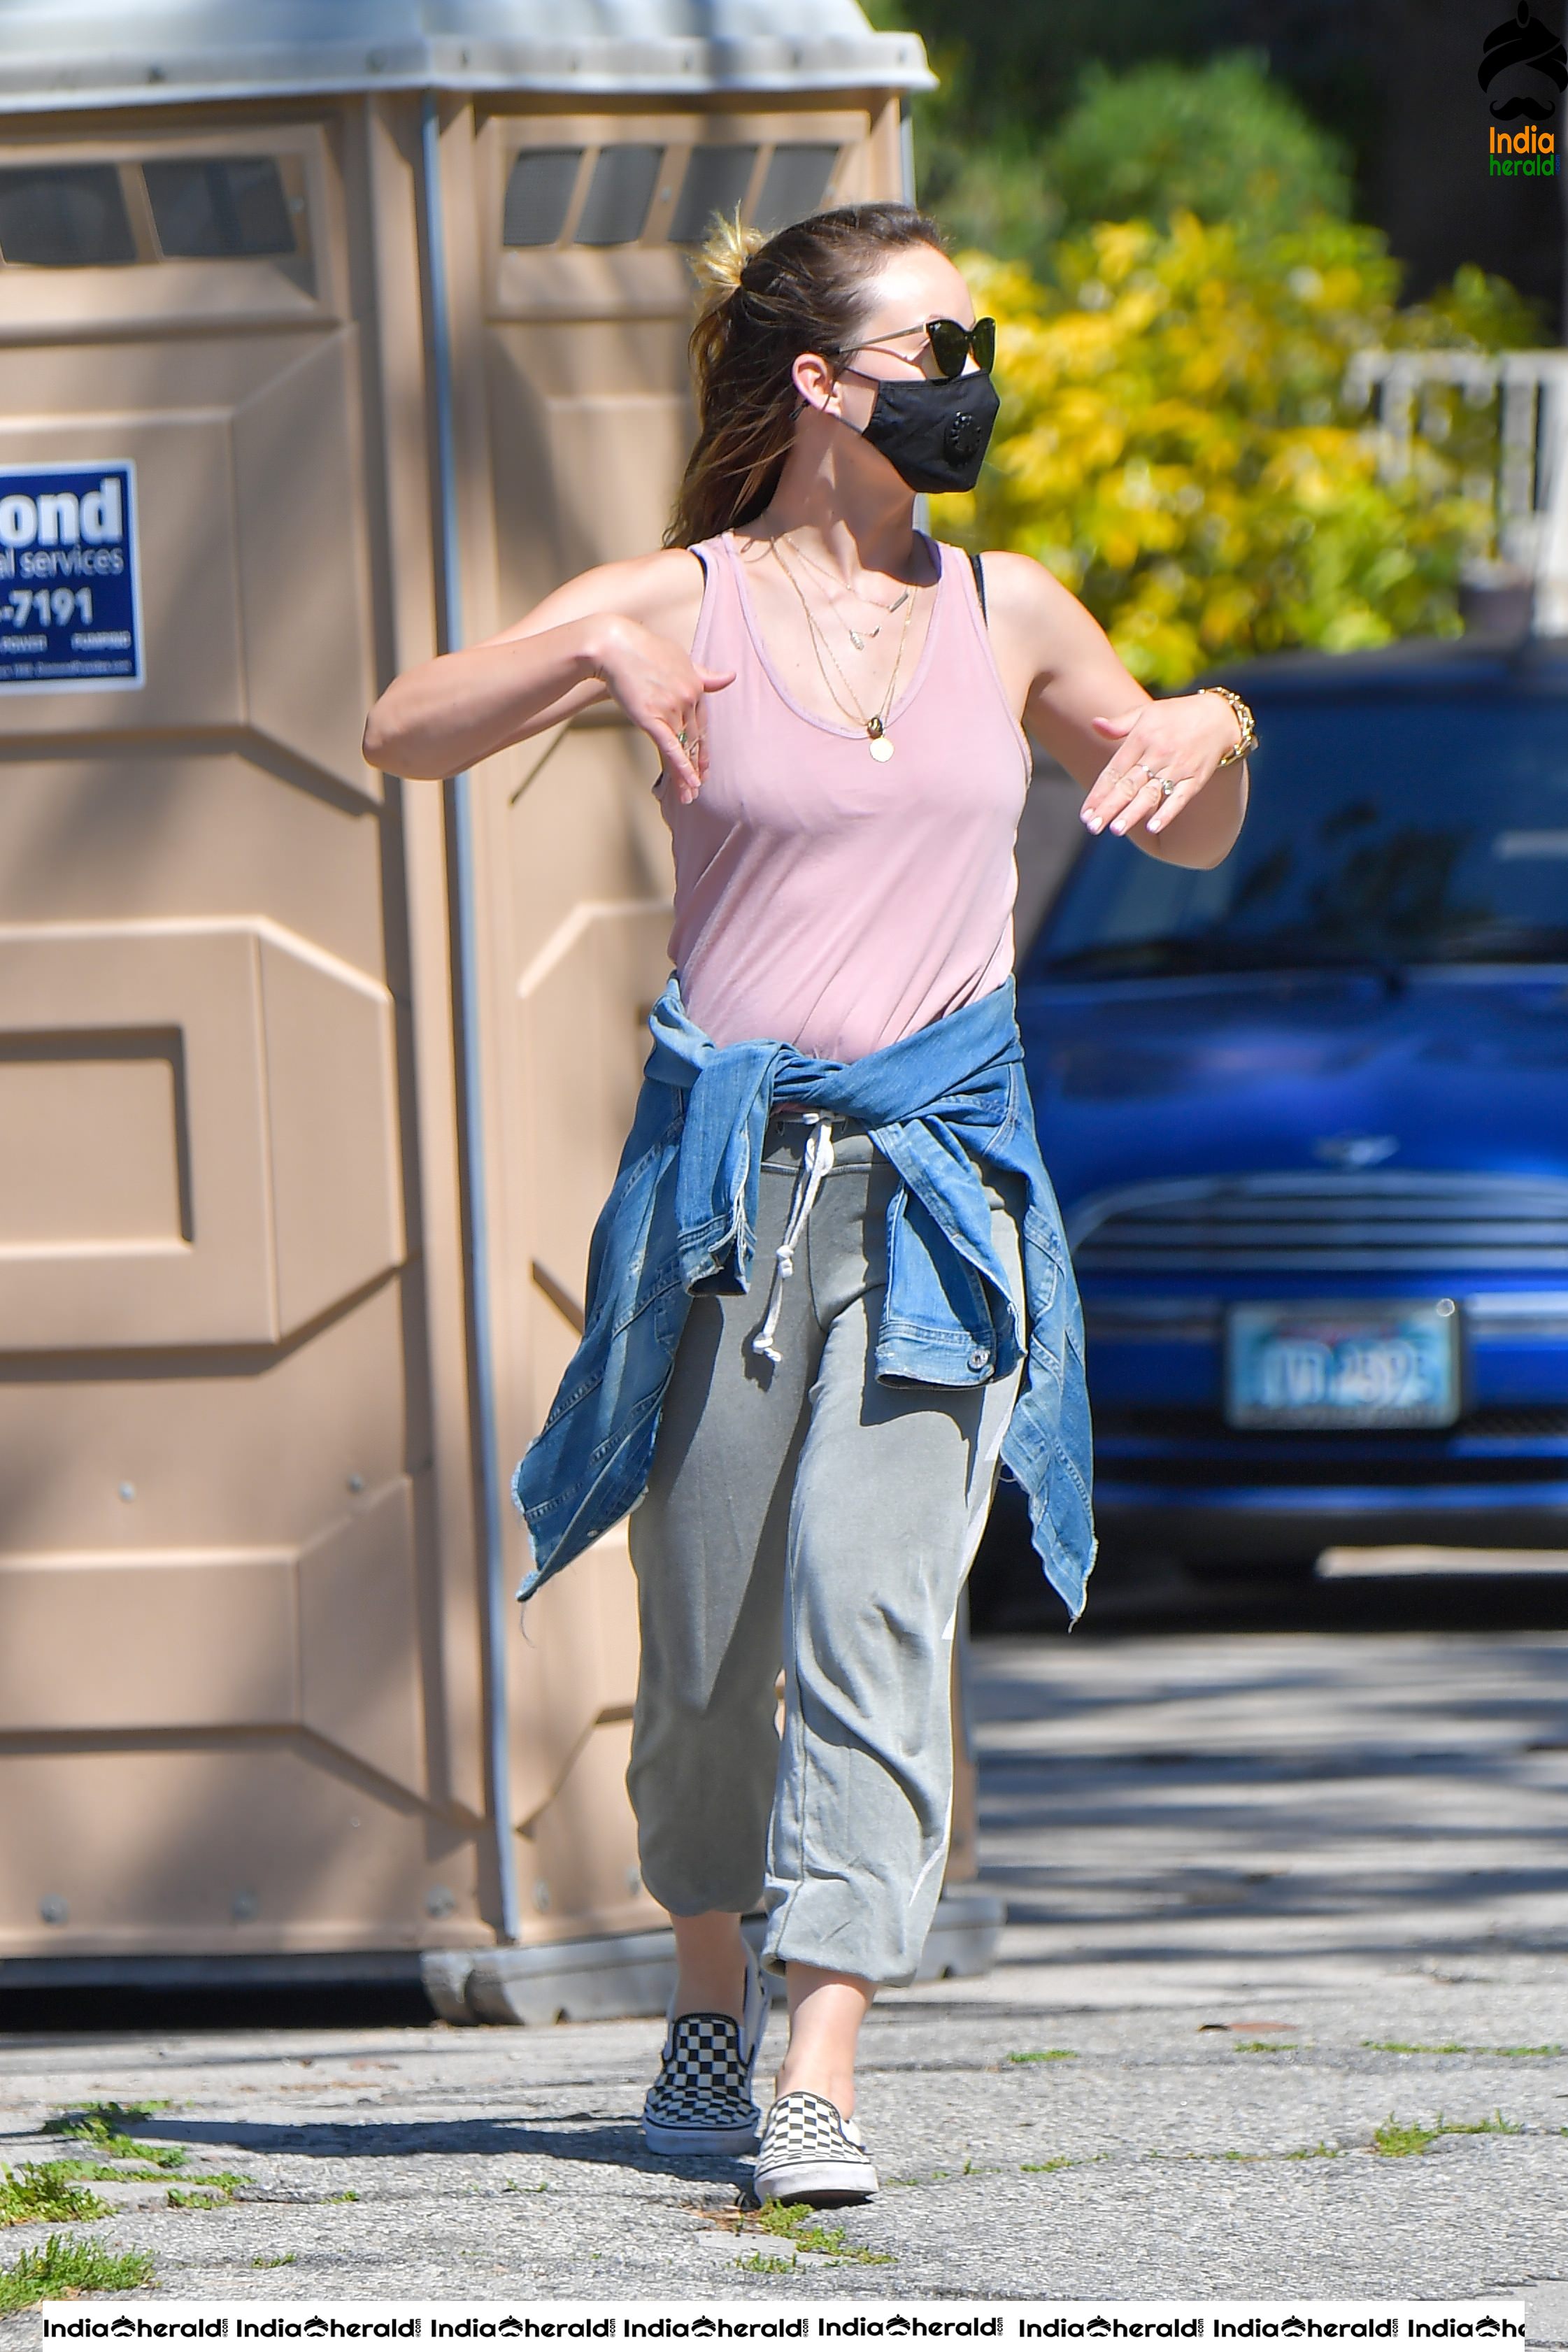 Olivia Wilde caught by Paparazzi with masks when out for a walk in Santa Monica